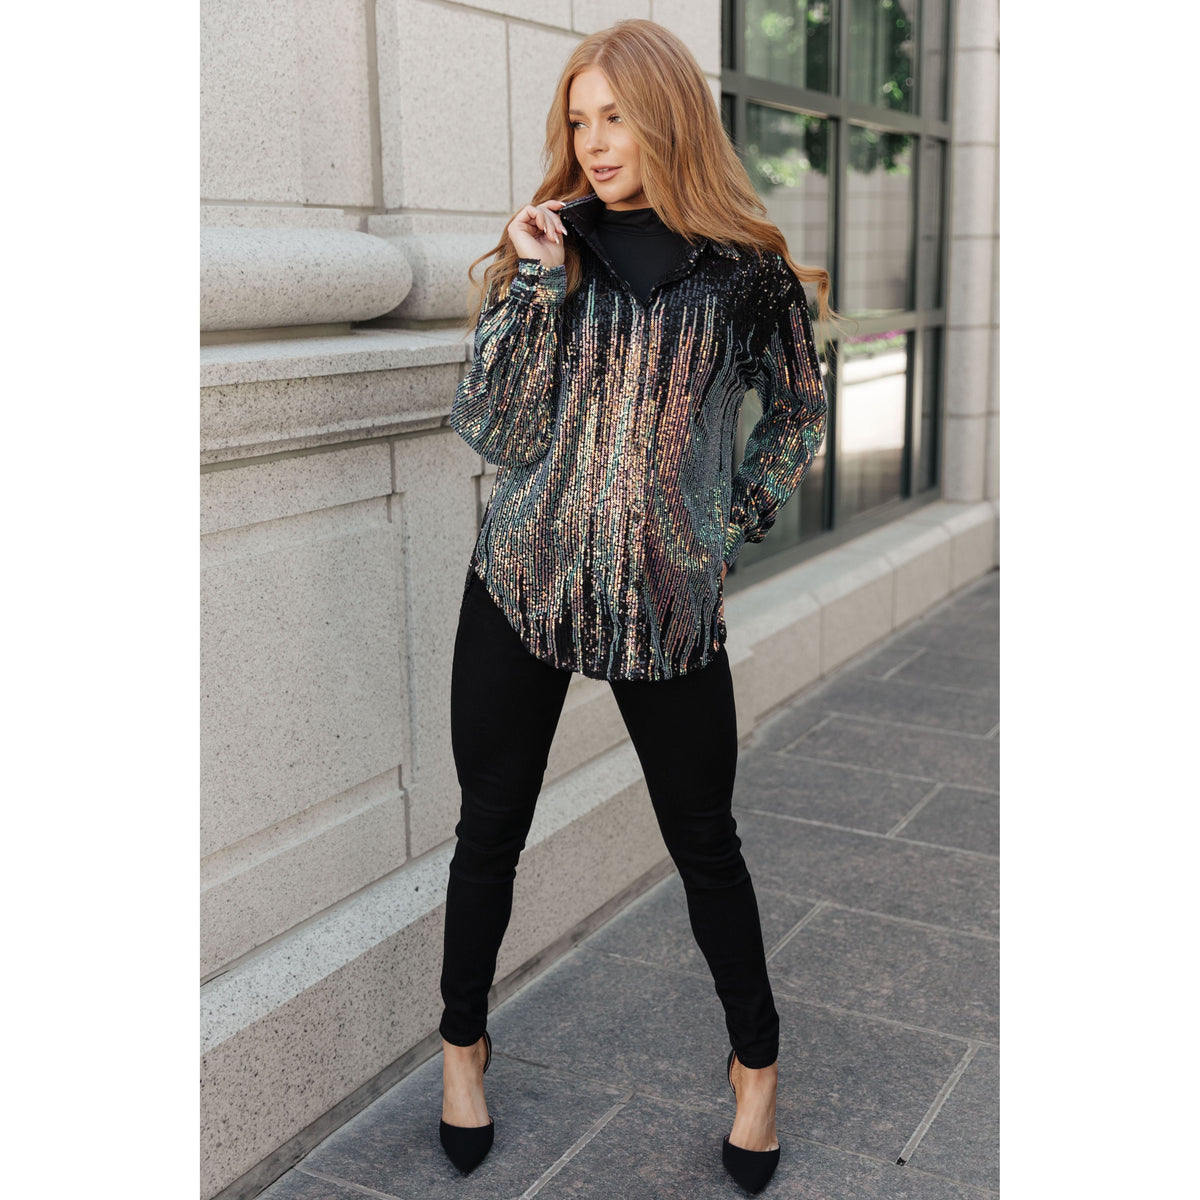 Women's Too Glitz to Glam Button Up Sequin Shirt